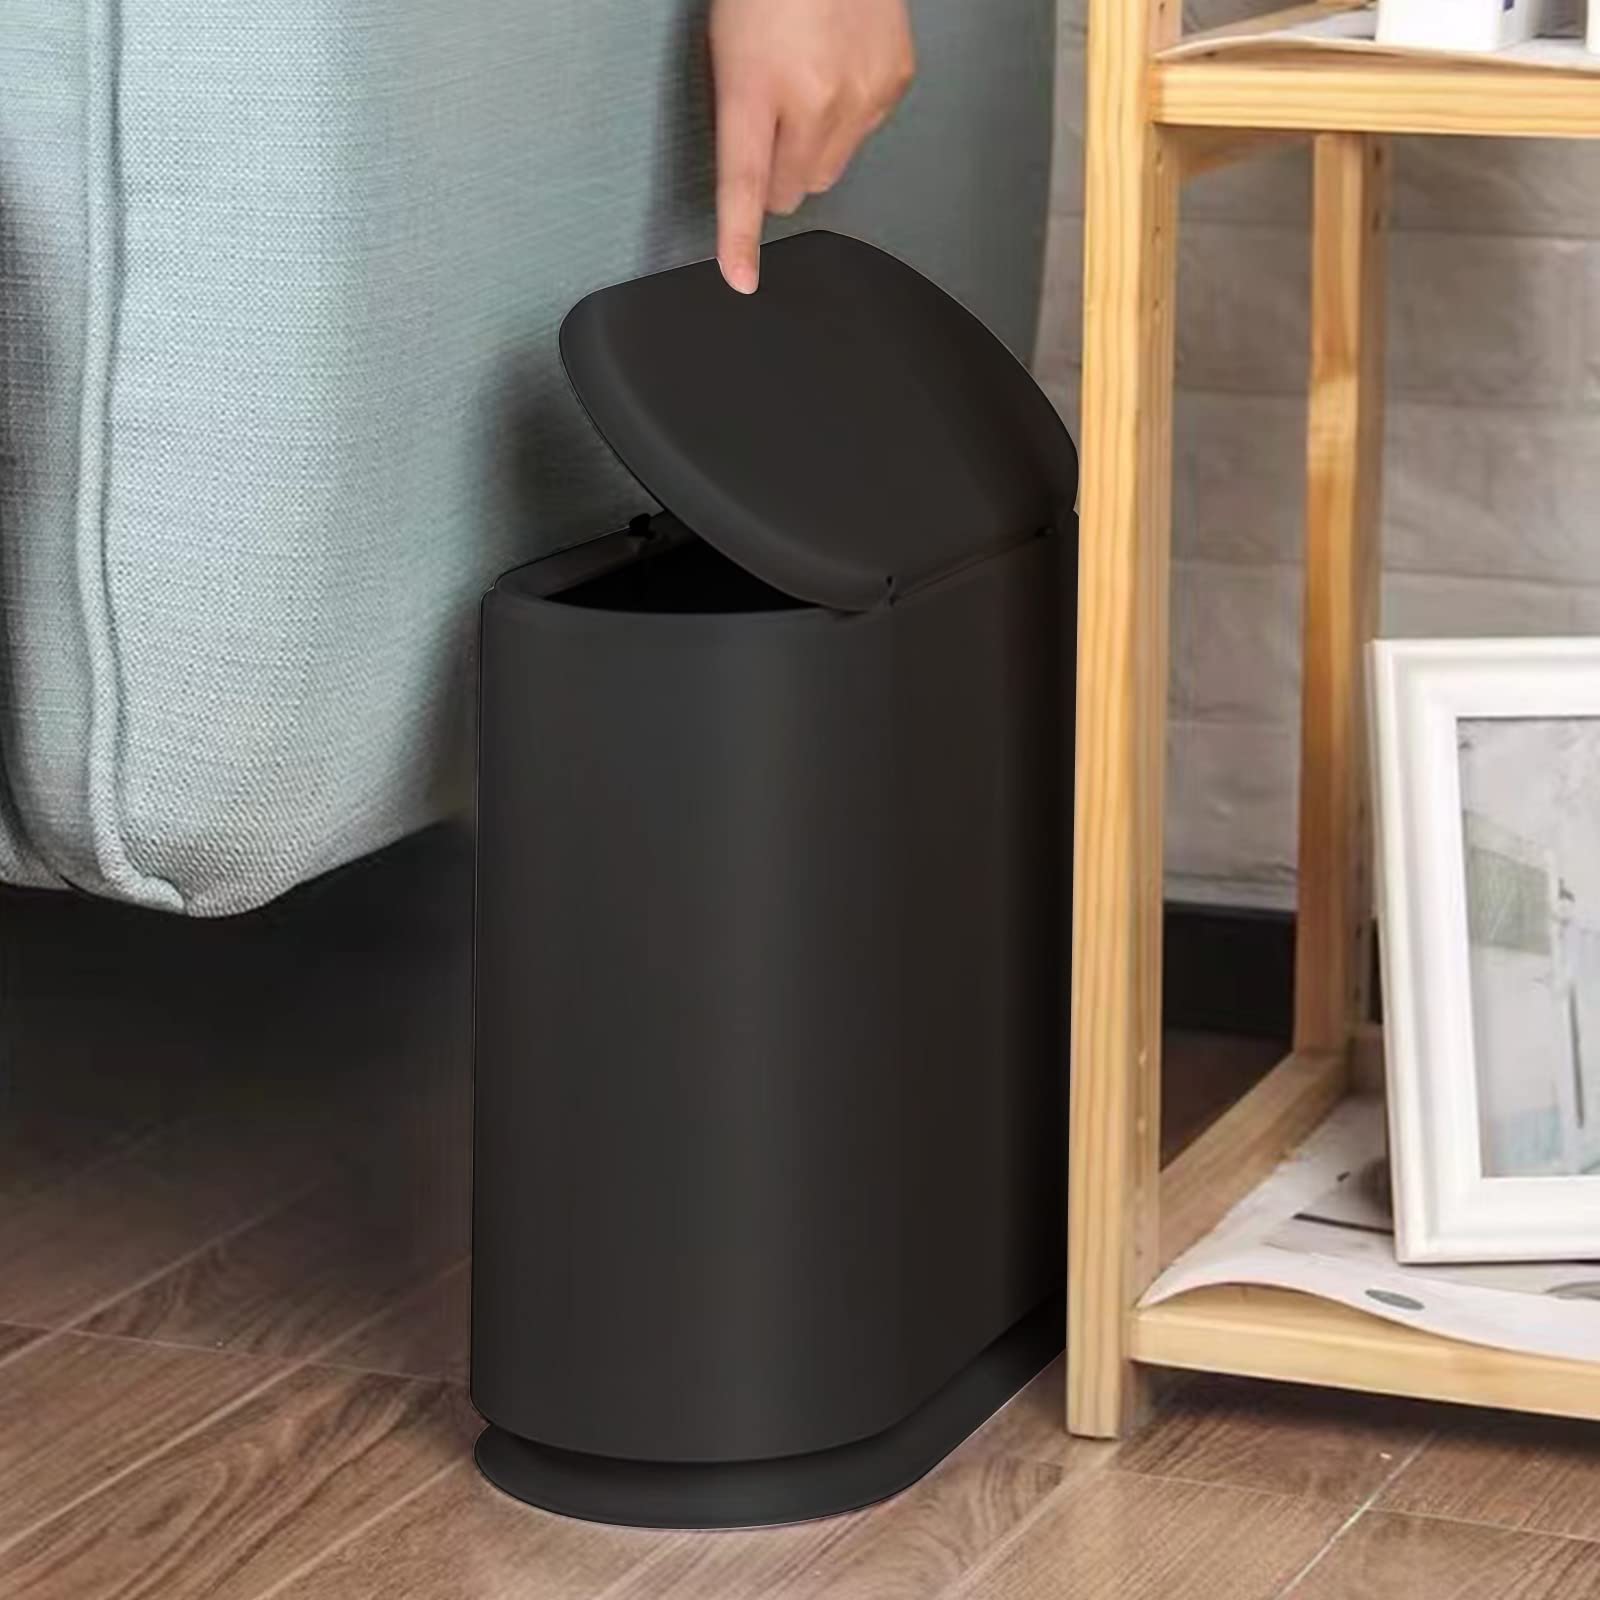 Press Type Plastic Trash Can, 10L Large Capacity Rectangular Trash Can with Lid, Double Trash Can with Carrying Handle, Garbage can for Living Room, Bedroom, Bathroom, Kitchen and Office (Black)